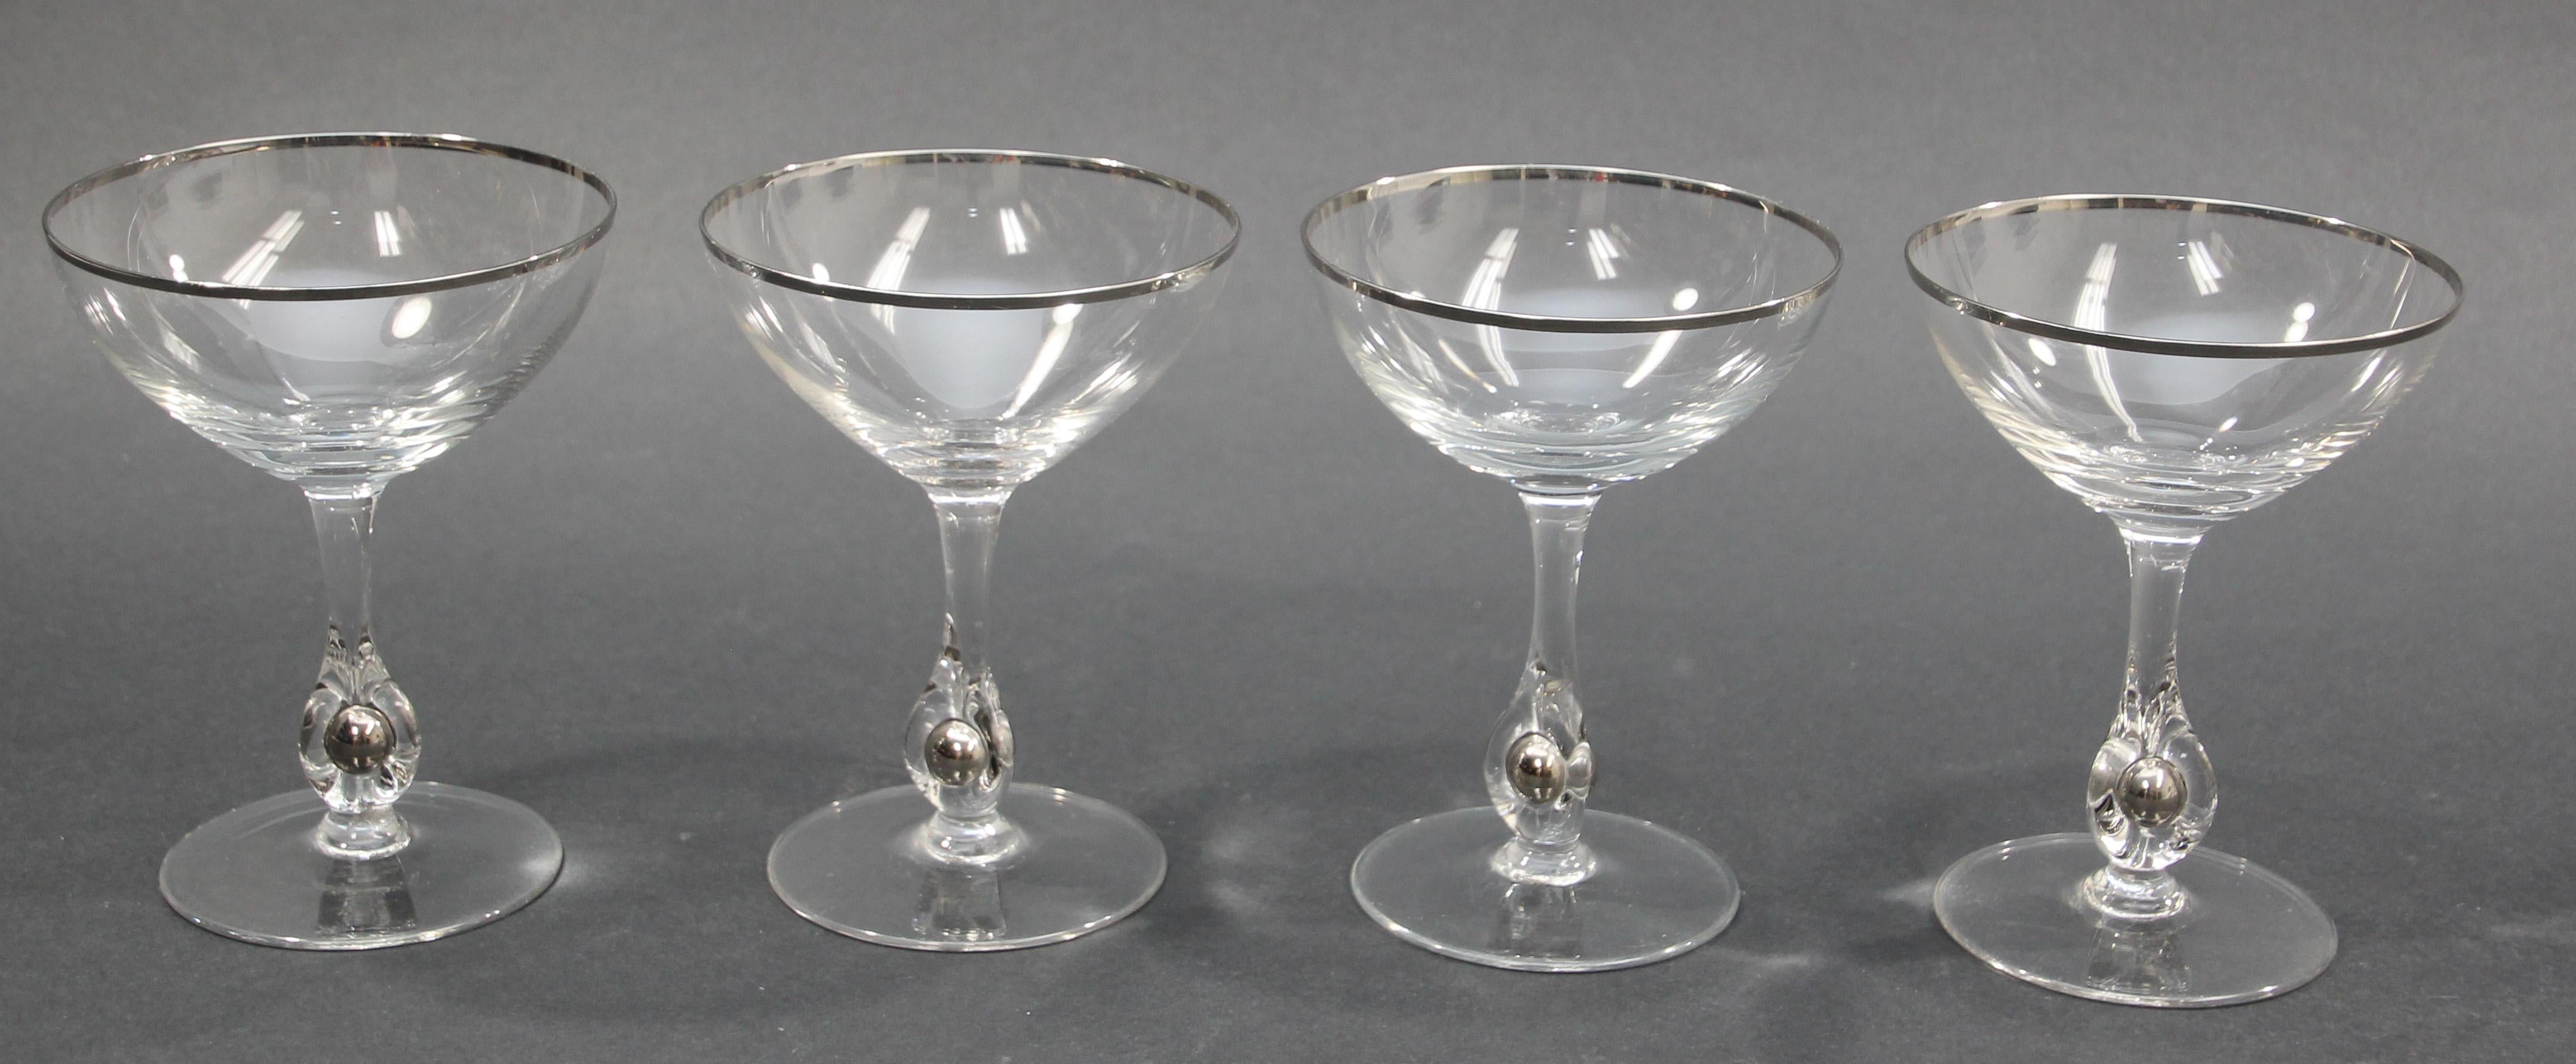 Crystal Footed Champagne Glasses with Silver Rim For Sale 3